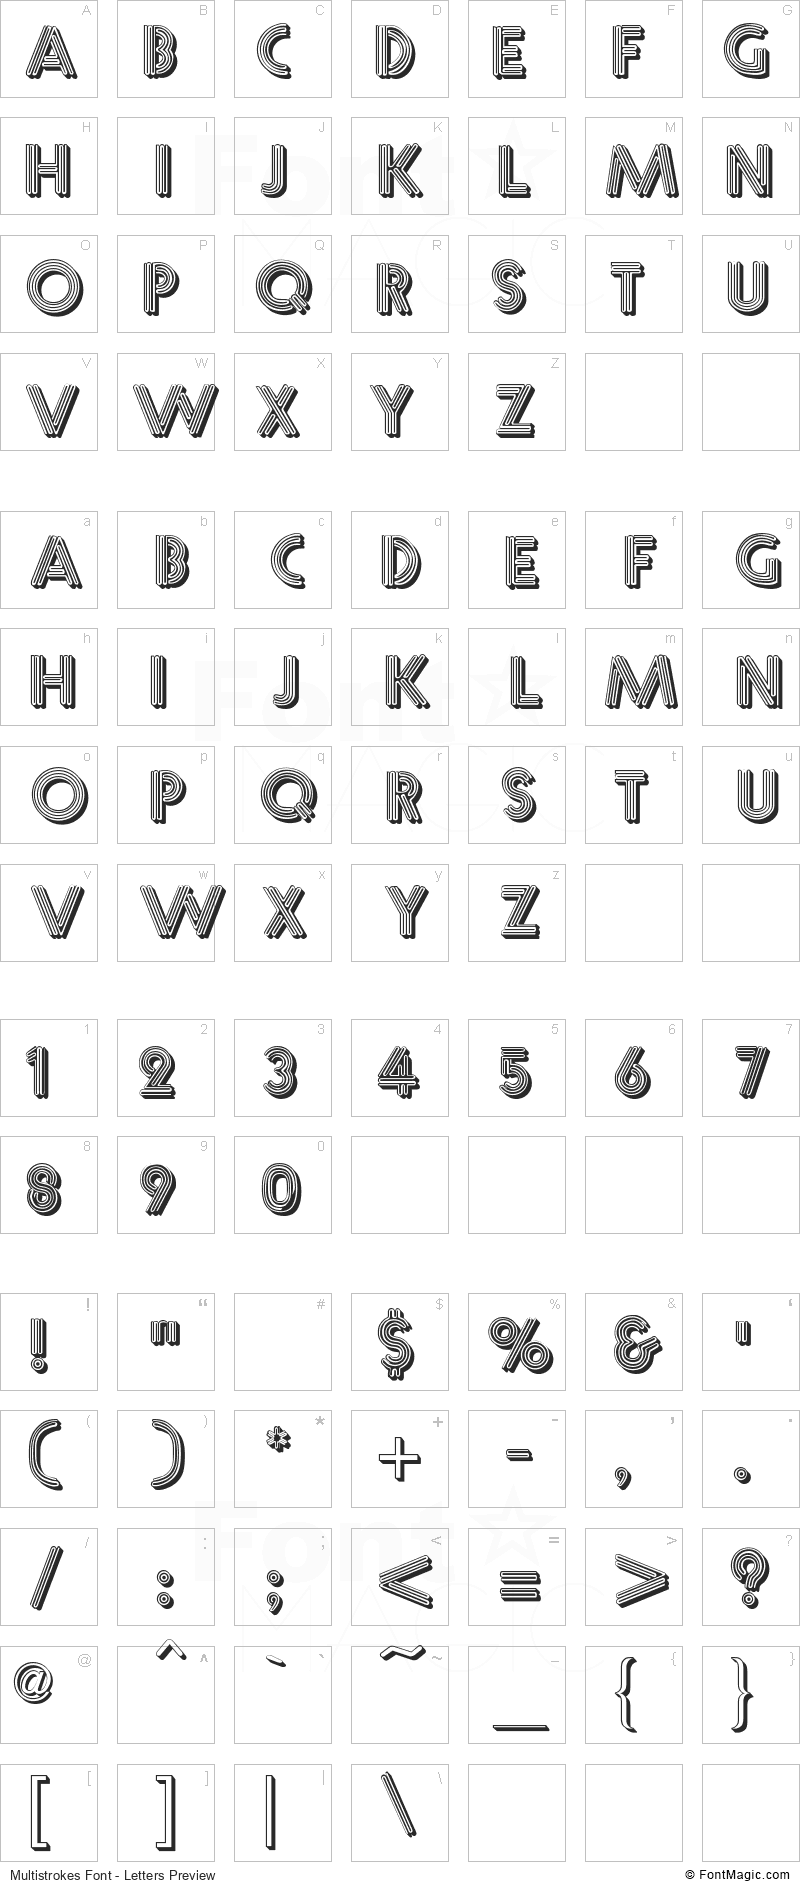 Multistrokes Font - All Latters Preview Chart